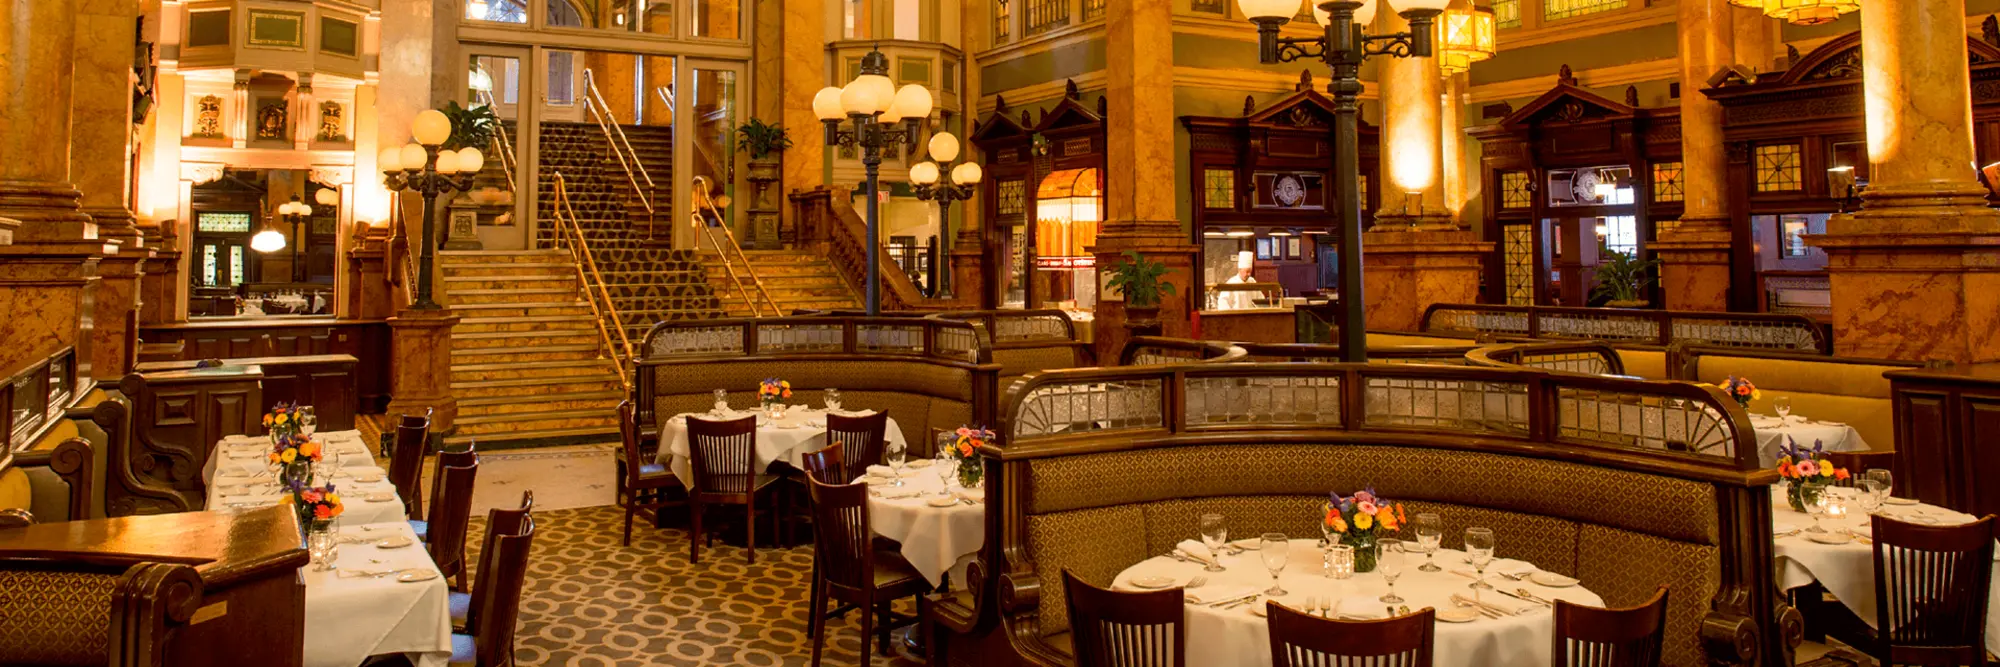 The Grand Concourse Restaurant in Station Square